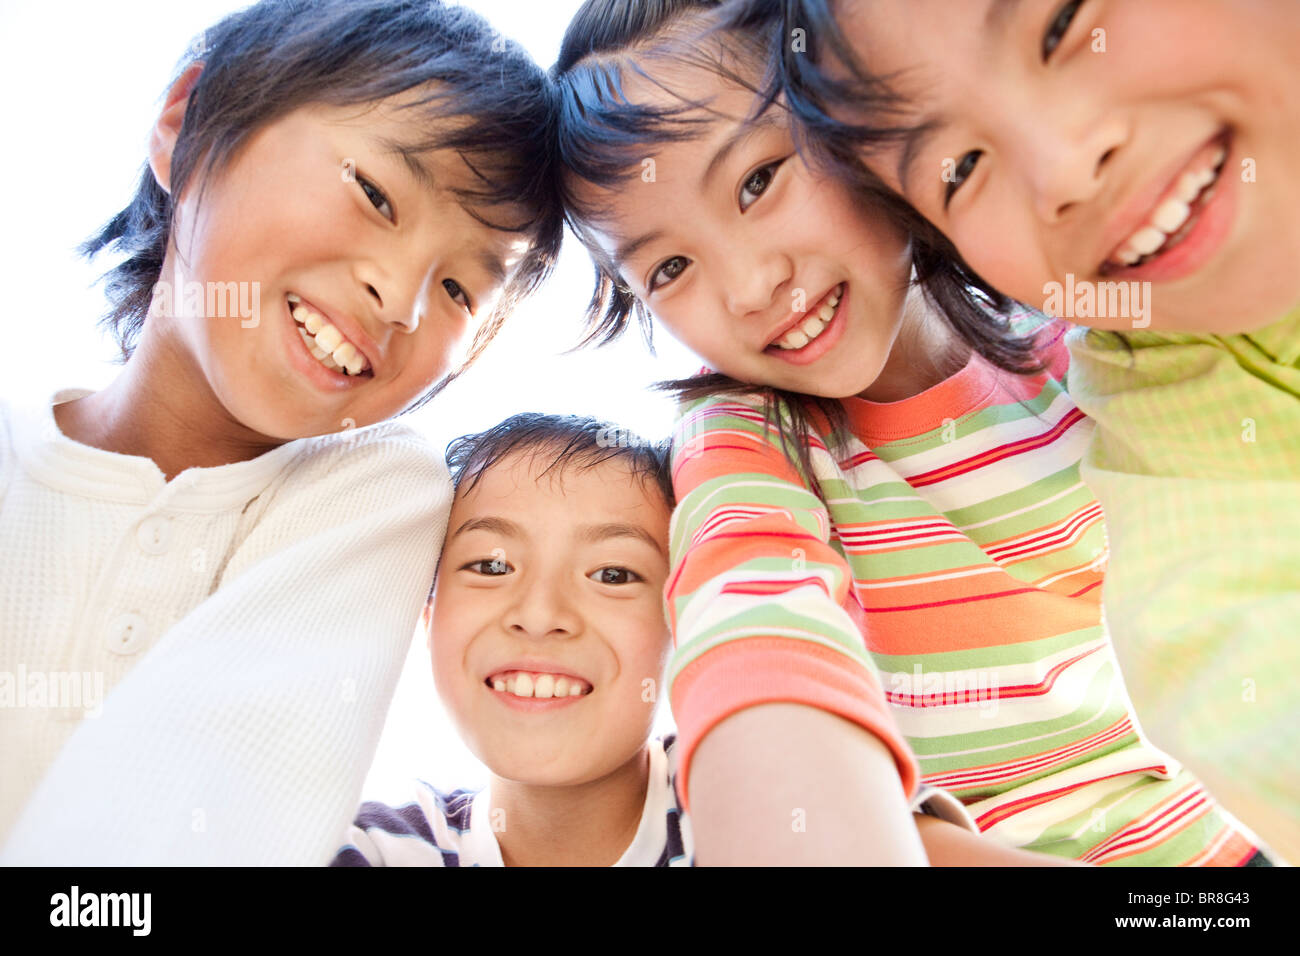 Children looking at camera Stock Photo